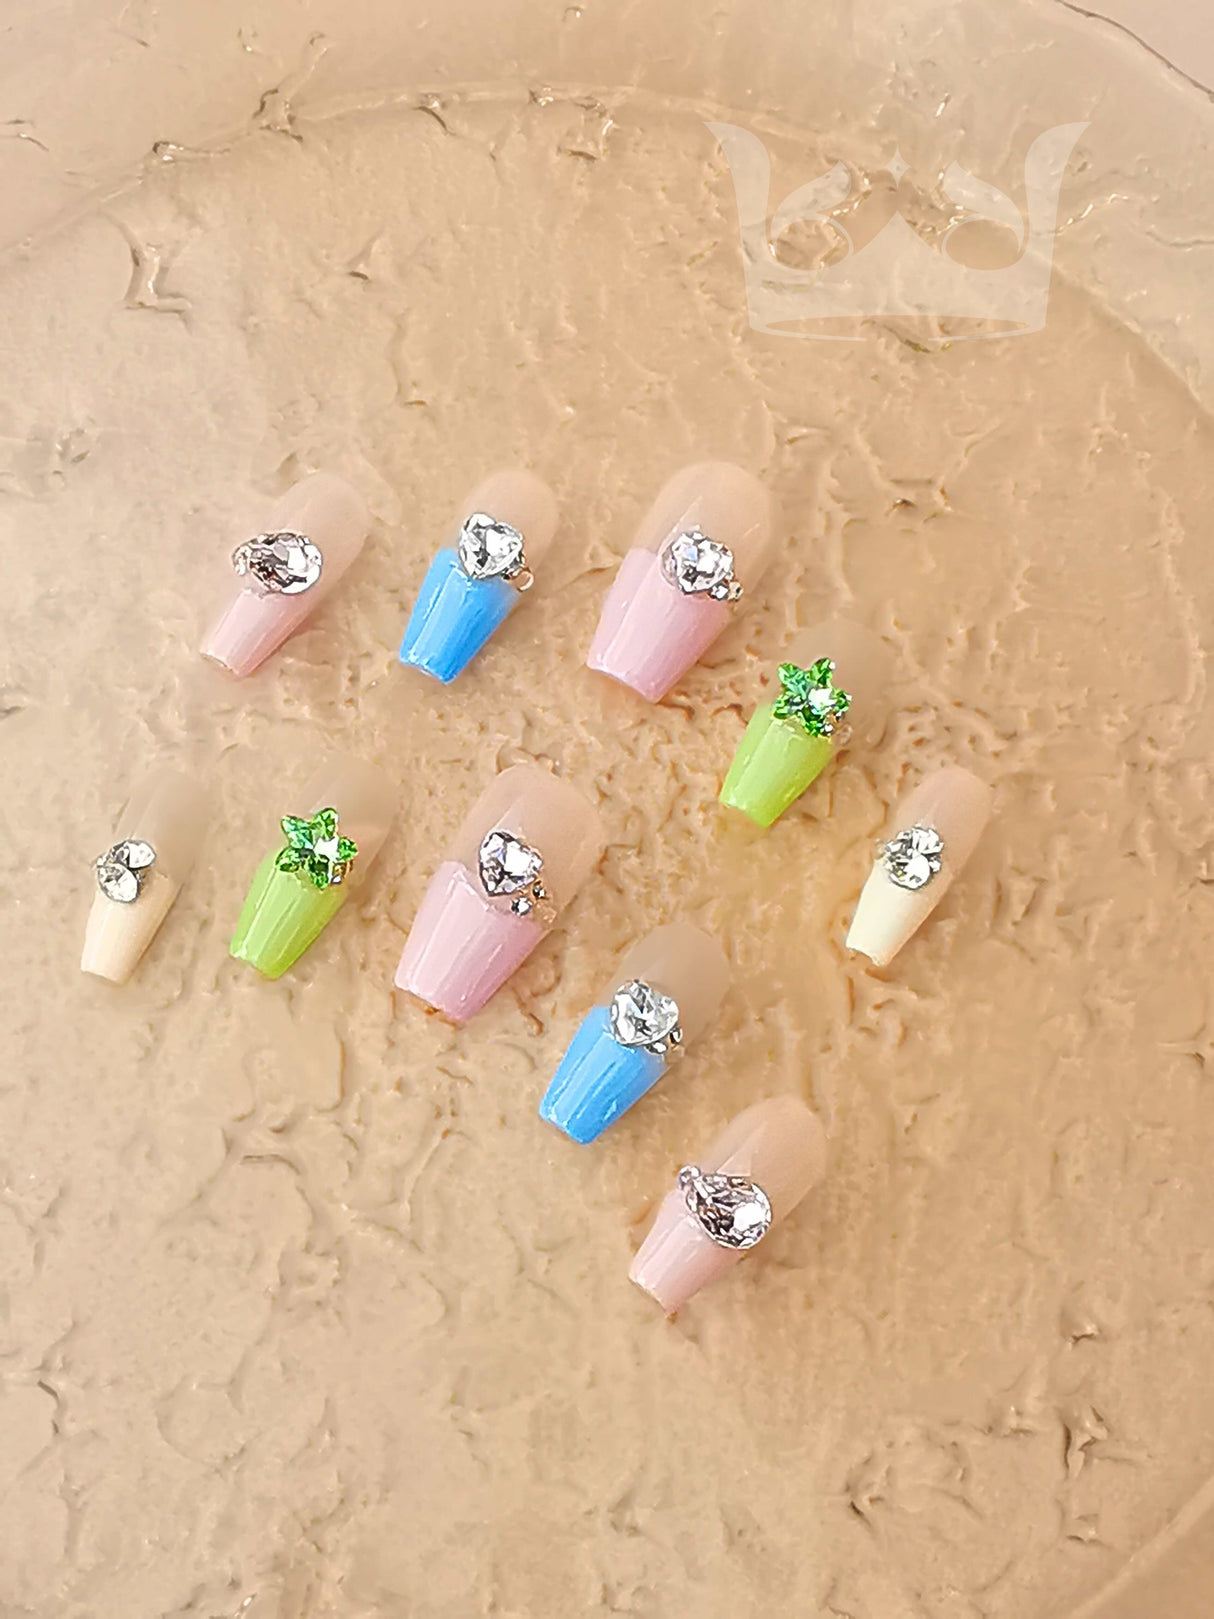 These press-on nails havea cool color scheme, glitter, gold accents, marble effect, and glossy finish creating a cohesive and elegant design. Ideal for weddings